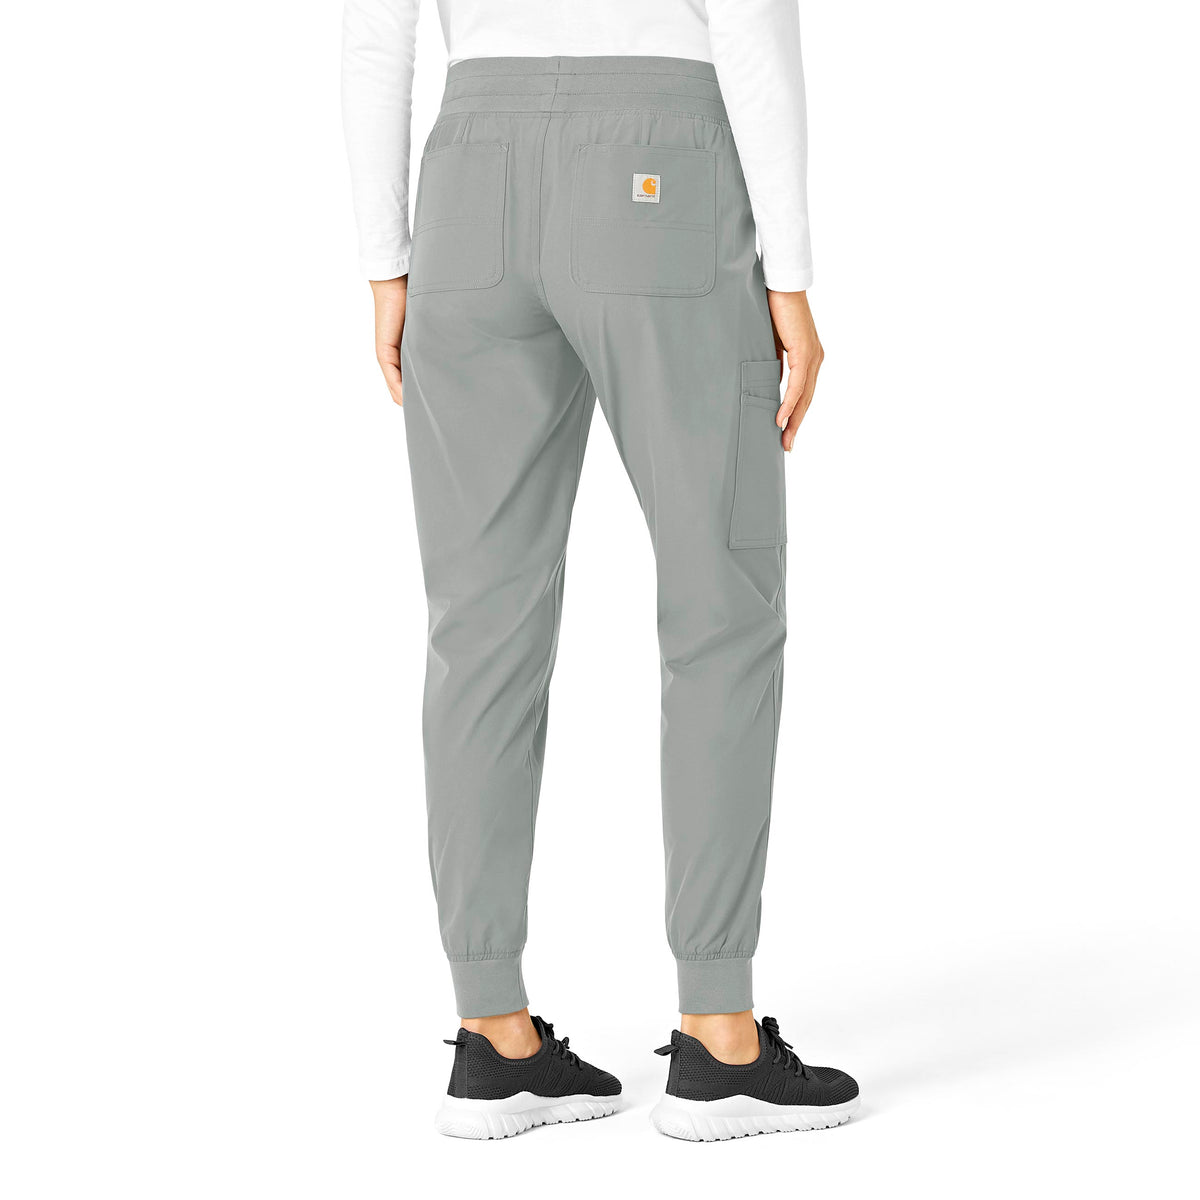 Force Essentials Women's Jogger Scrub Pant Grey back view